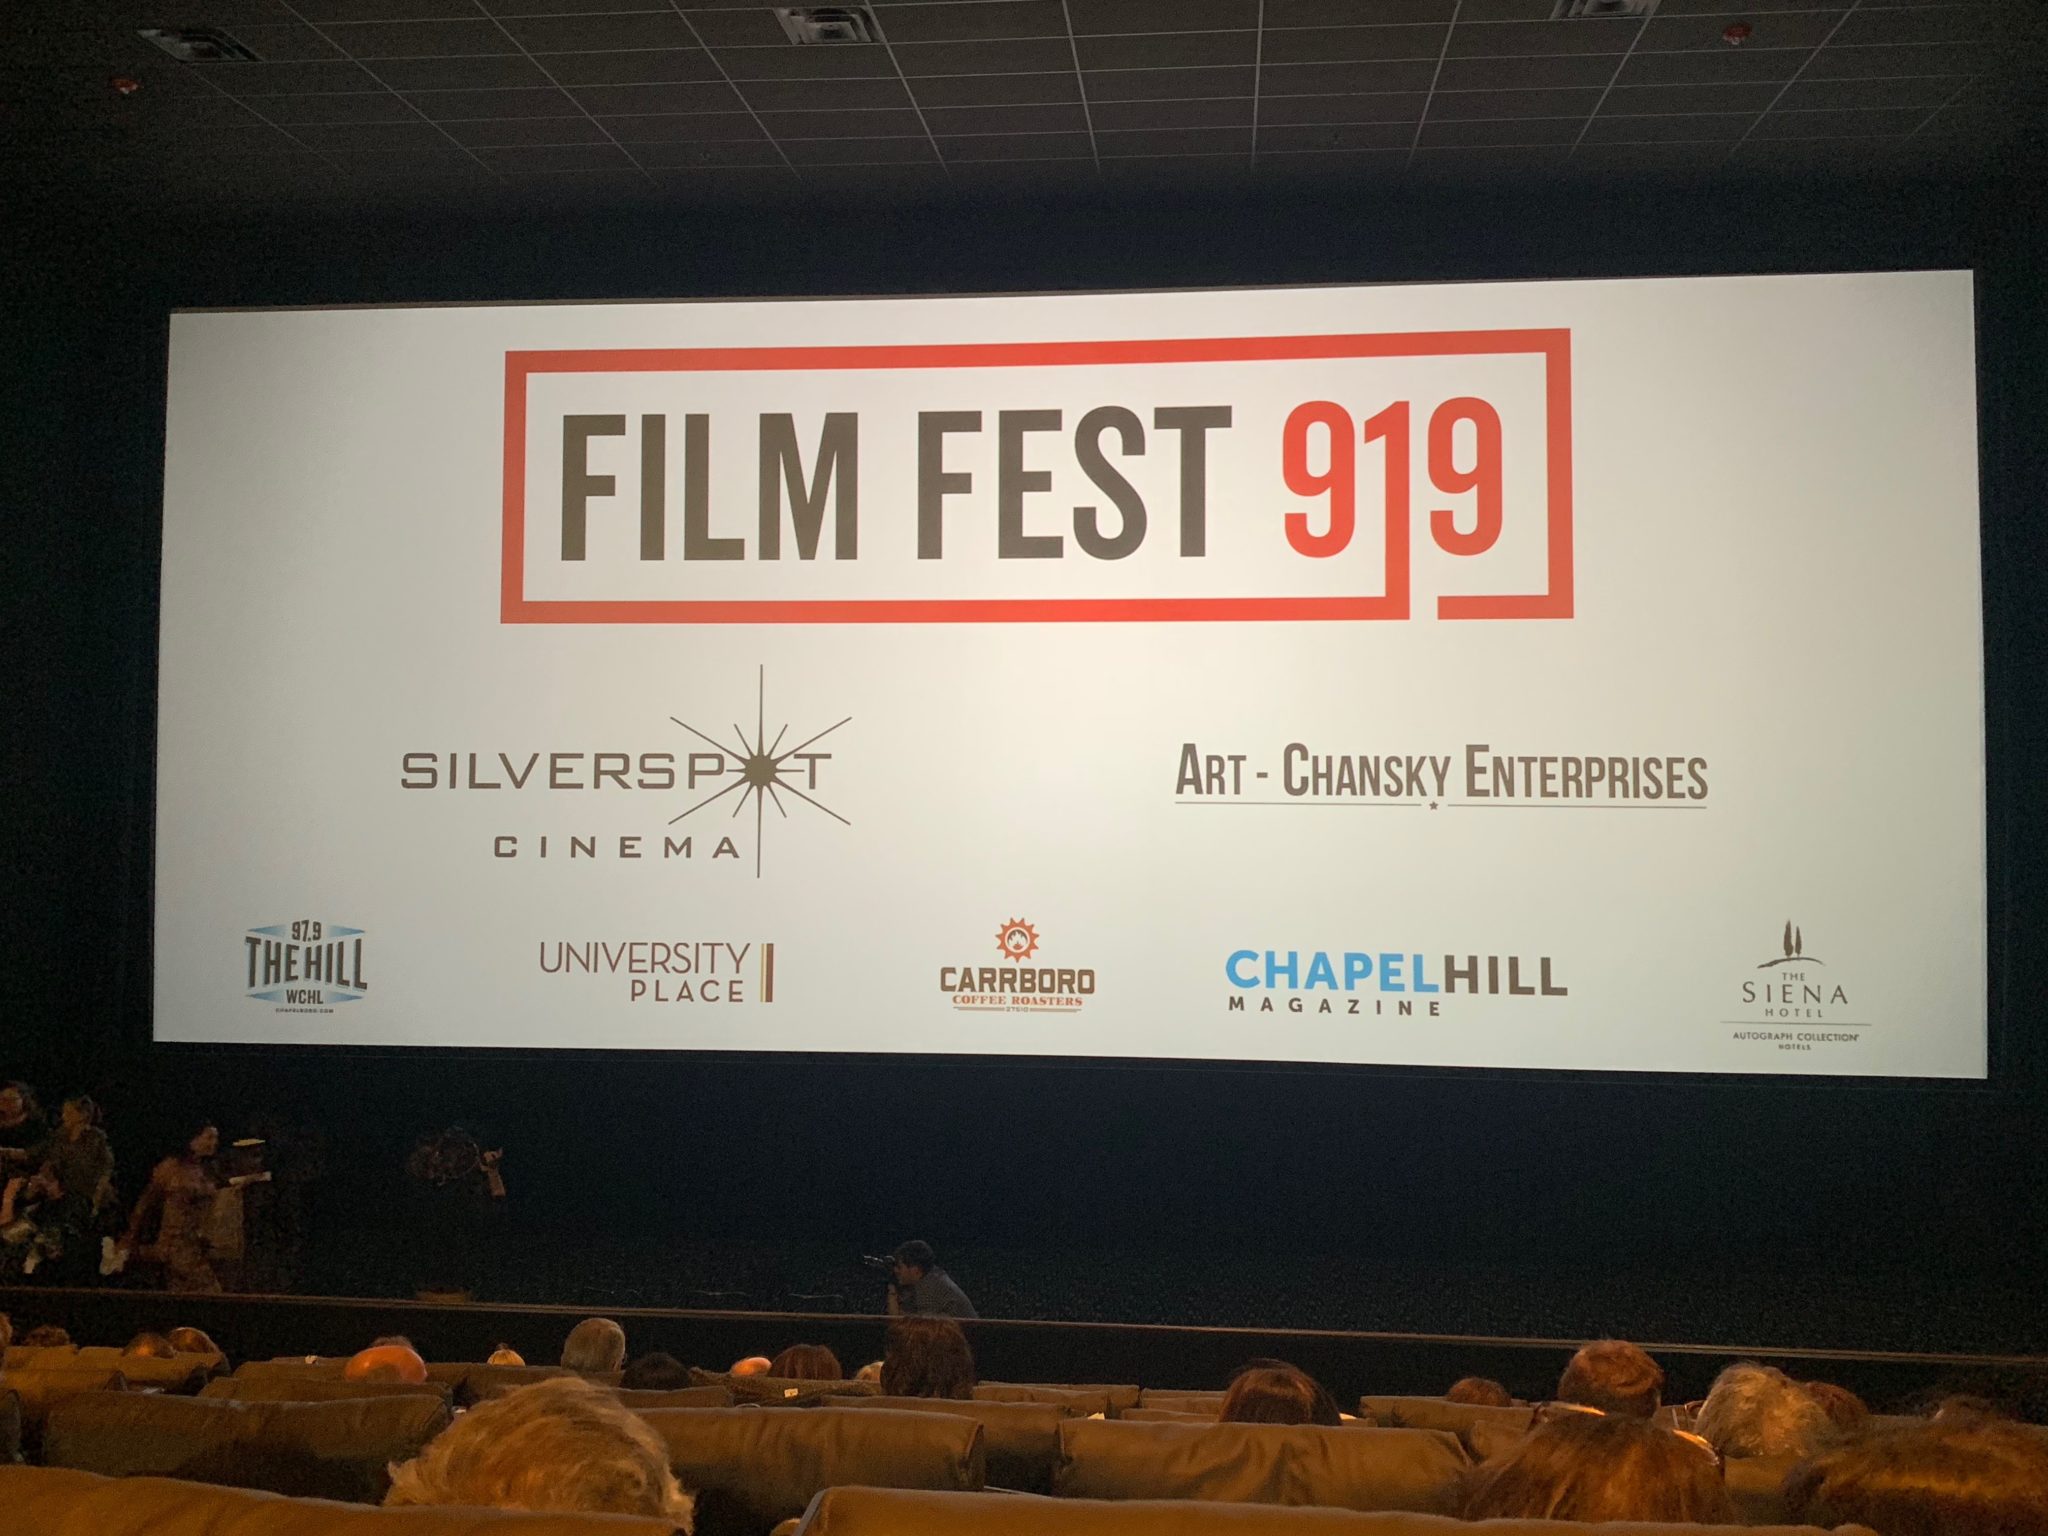 Film Fest 919 launches this week at Silverspot Cinemas in Chapel Hill North Carolina with an impressive lineup of sure to be award season favorites.